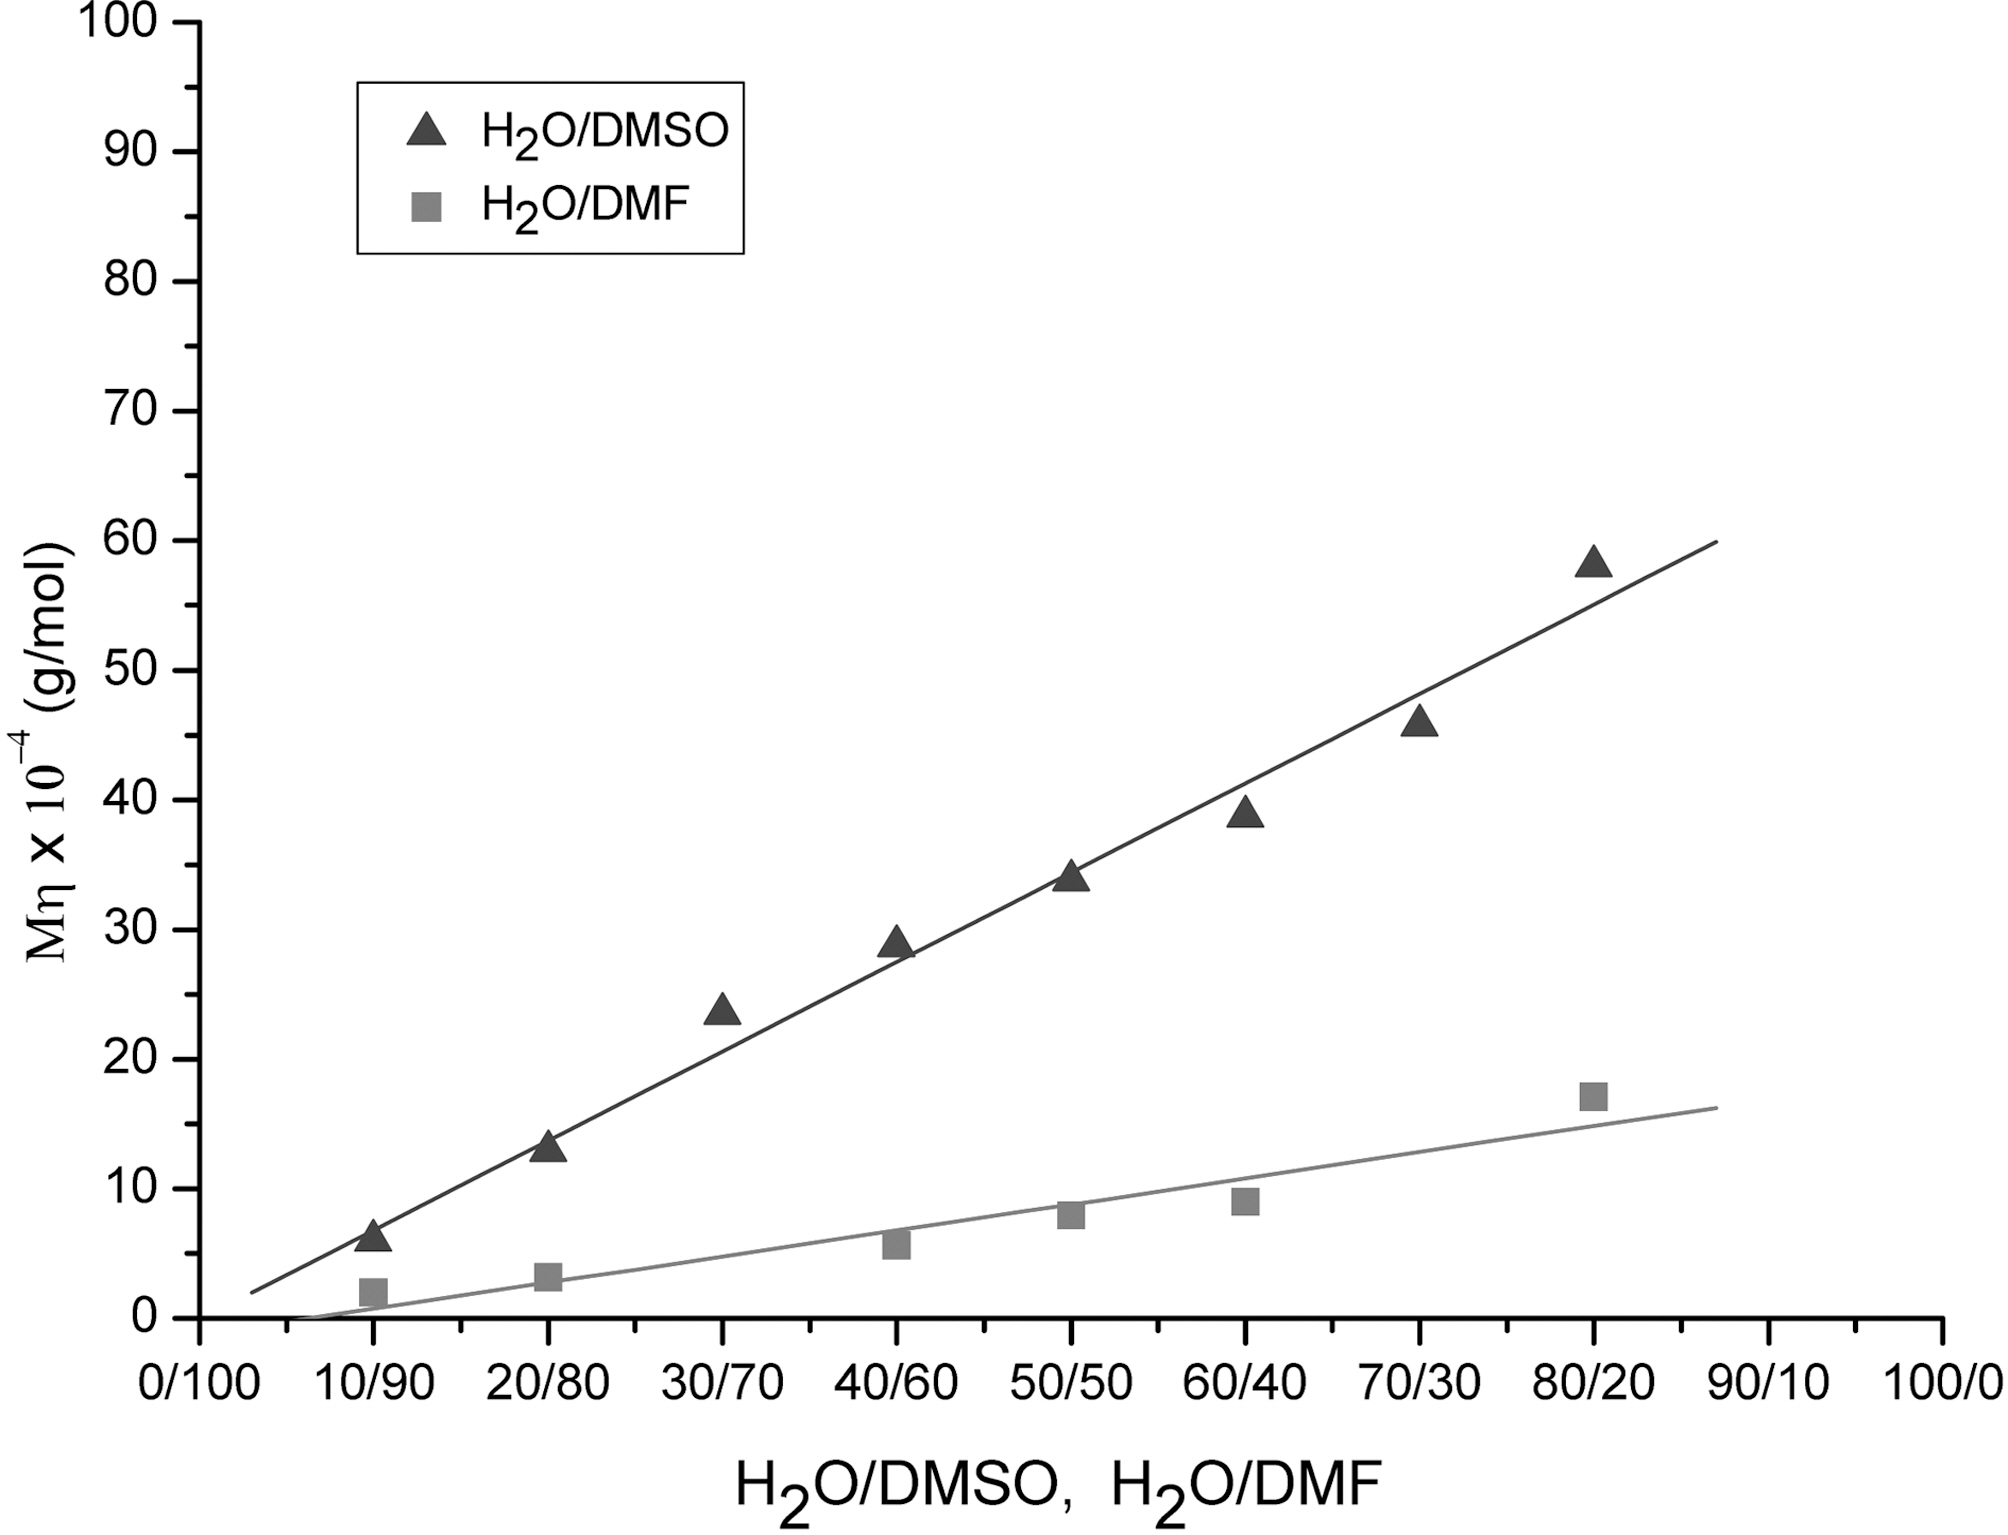 Viscosity average molecular weights of PAN from H2O/DMSO and H2O/DMF solvent in precipitation polymerization at60oC.